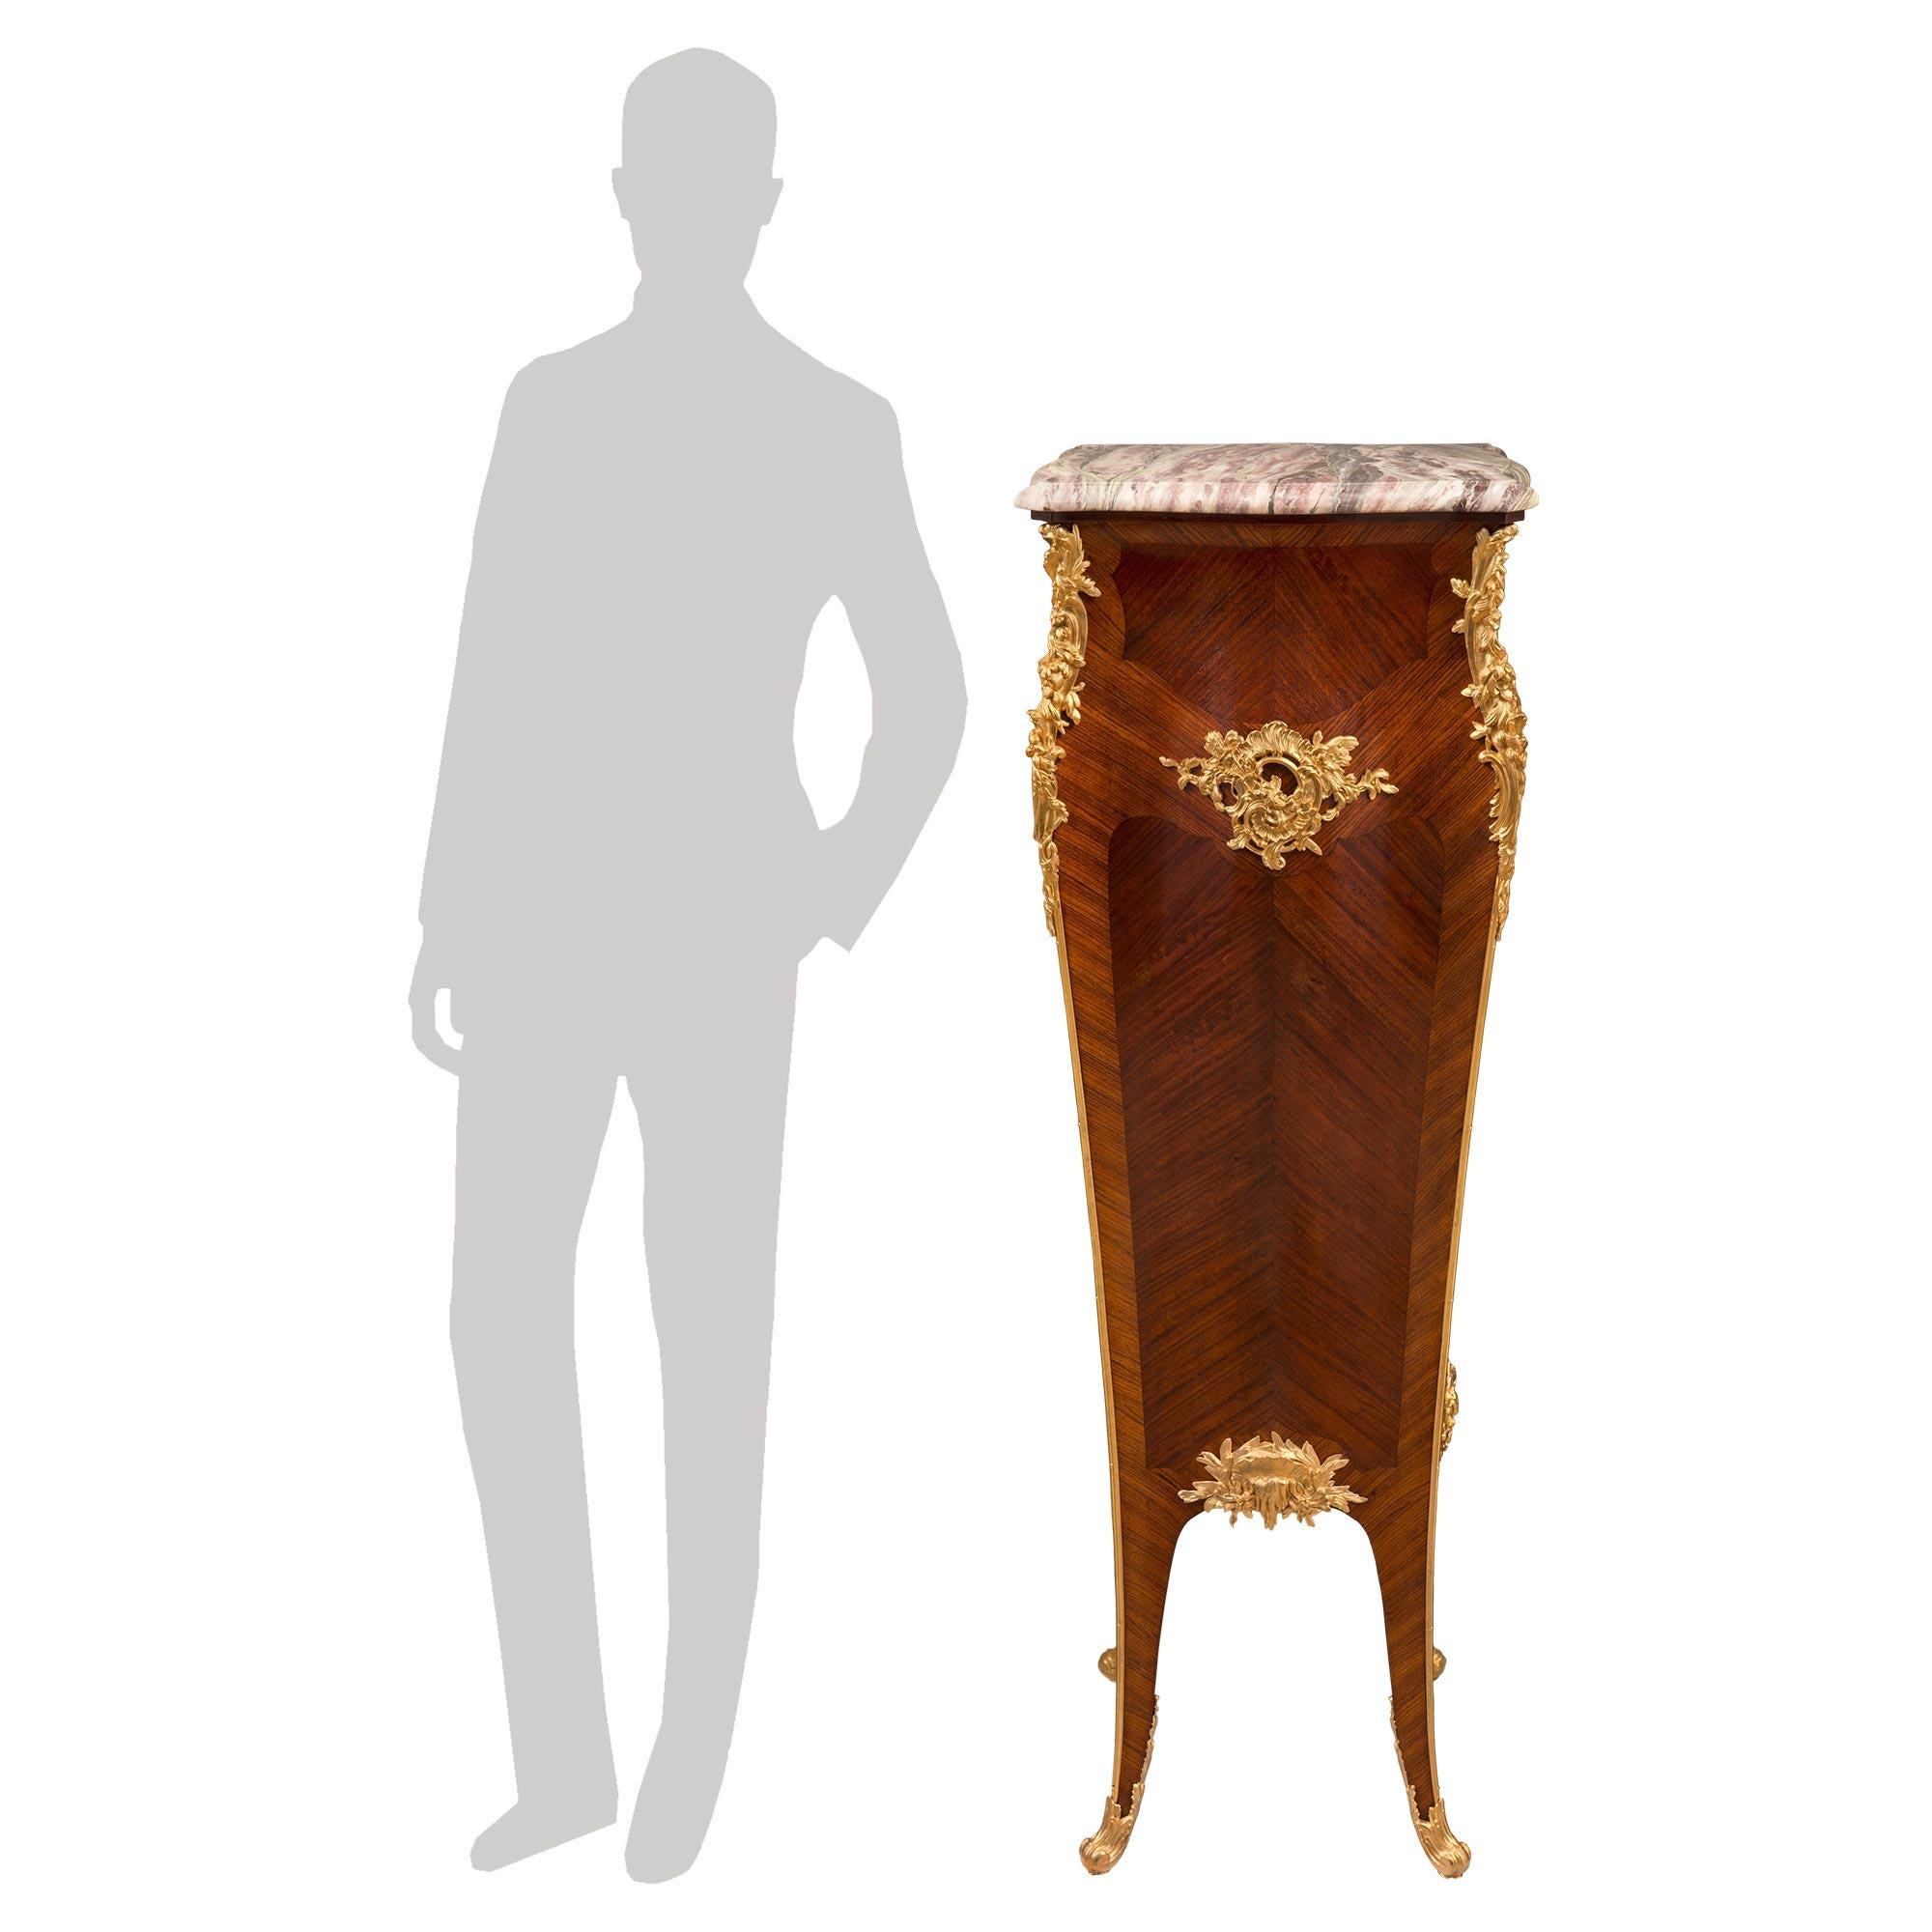 An impressive and most elegant French 19th century Louis XV st. kingwood, ormolu and Brèche Violette marble pedestal column, in the manner of François Linke. The pedestal is raised by beautiful lightly curved tapered legs with impressive finely